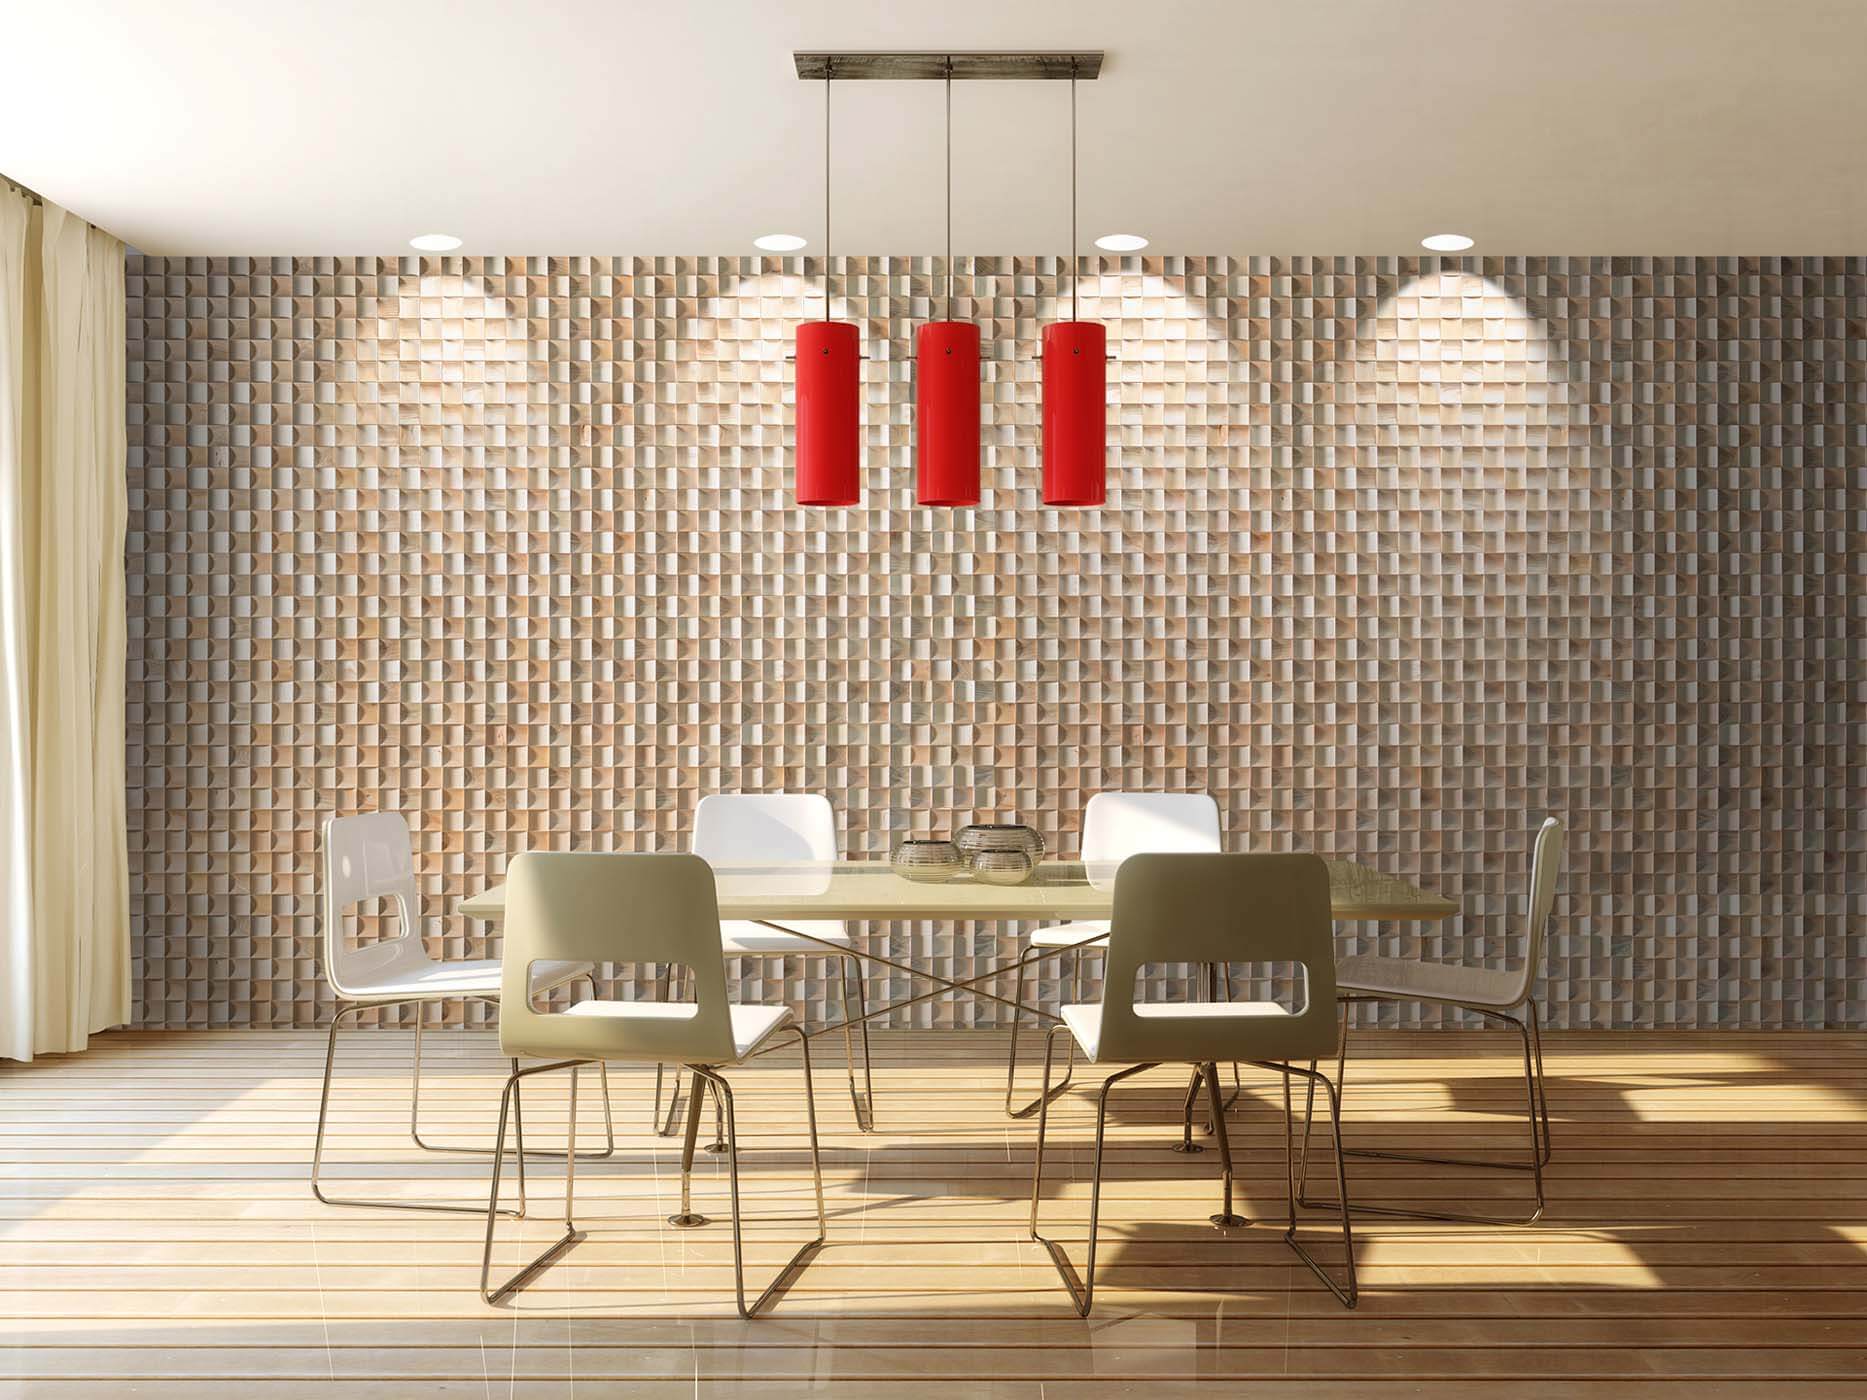 Decorative wall panels in dining room